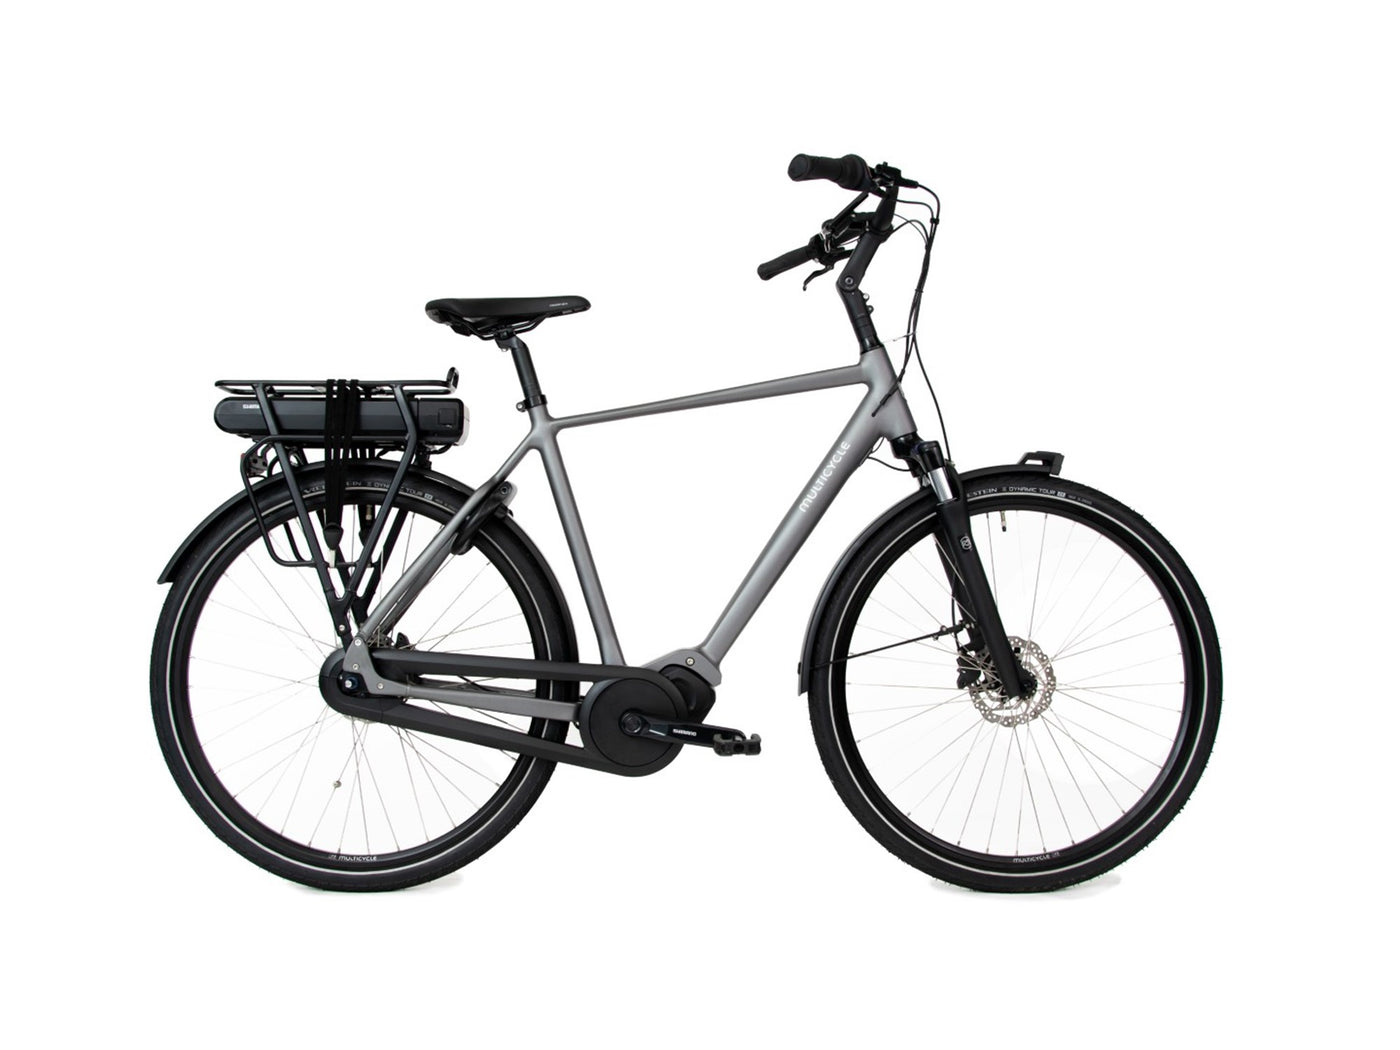 MULTICYCLE SOLO EMI 400wh